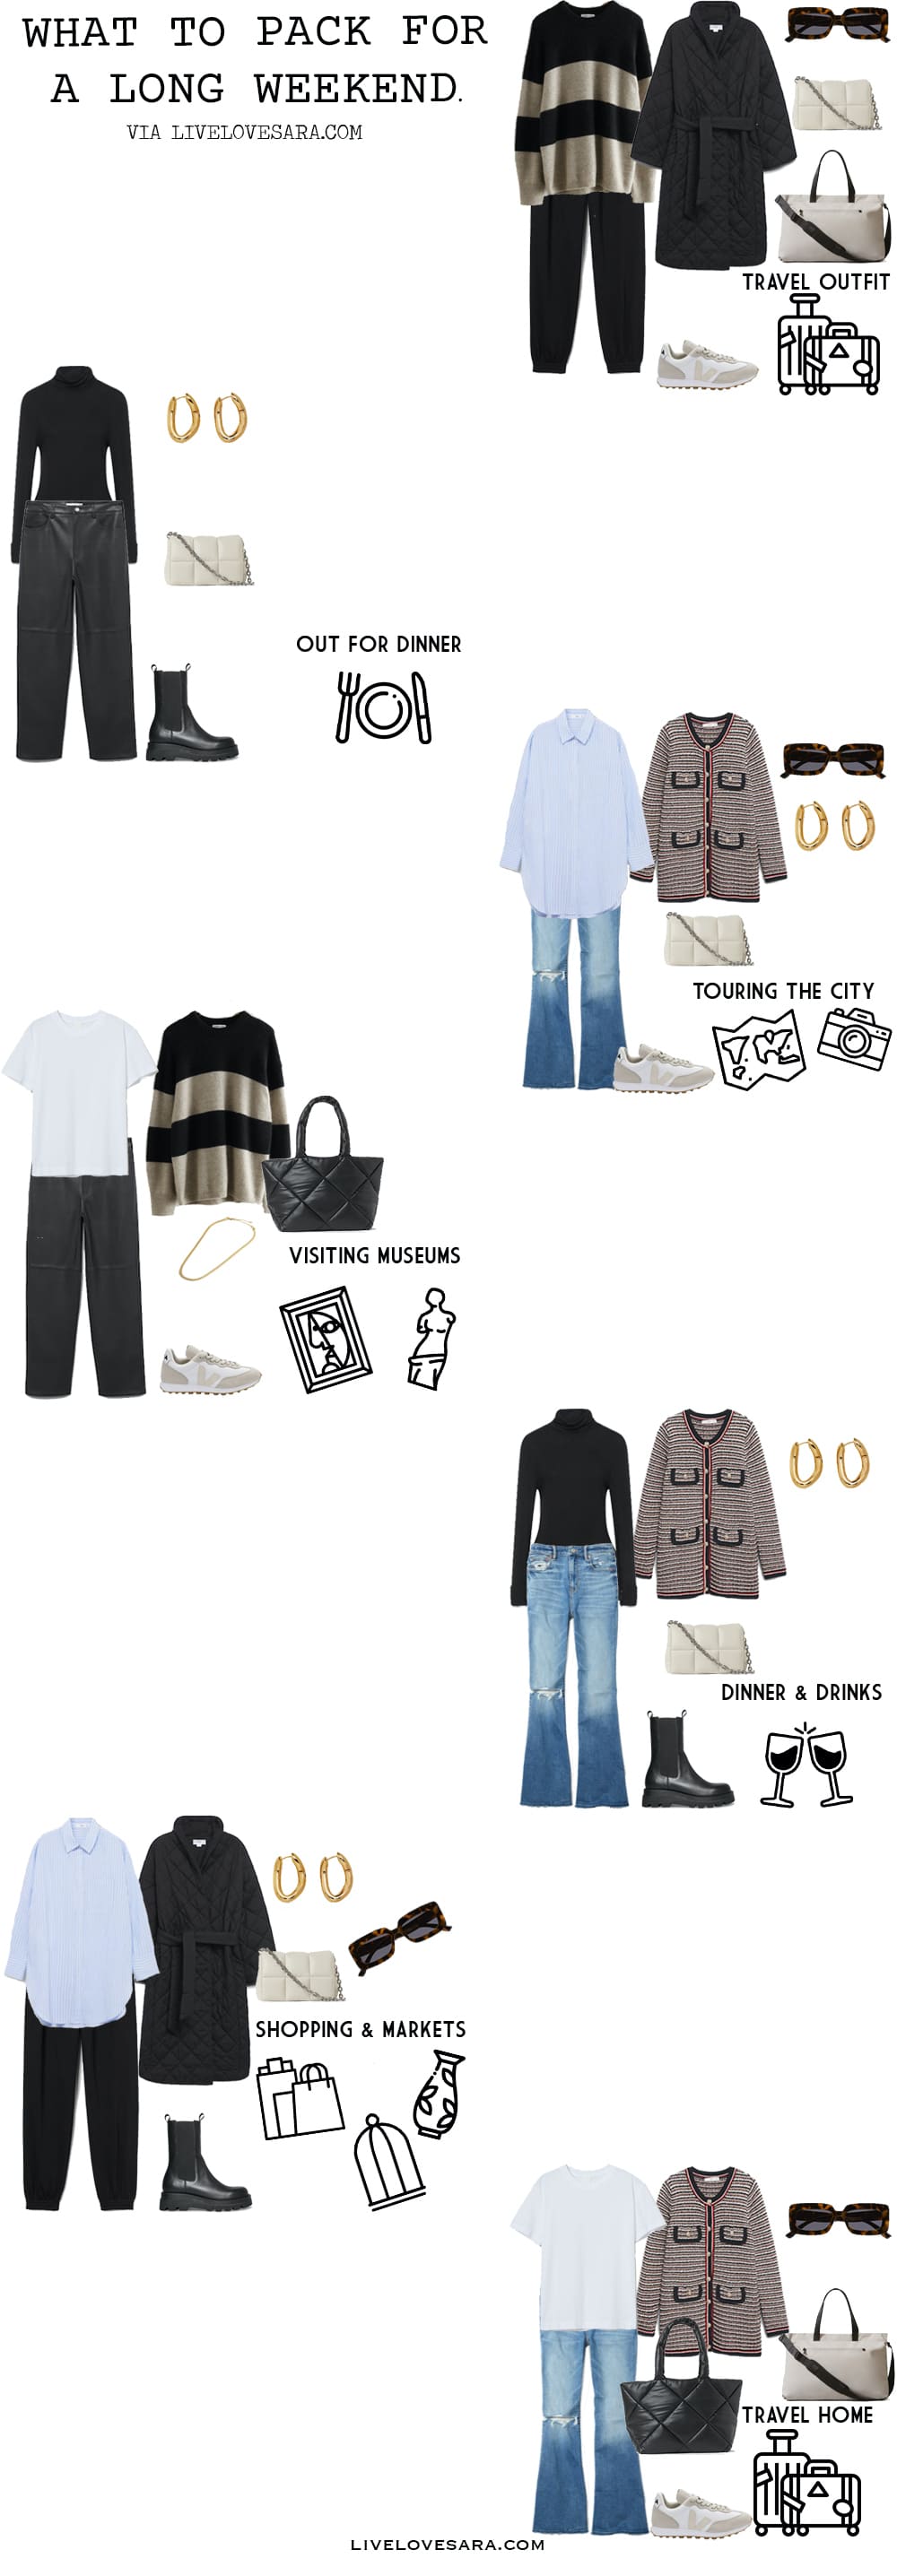 A white background with a photo of a rainy downtown street with people and car at the top. Below is a layout of what you should pack for a long weekend in the fall.